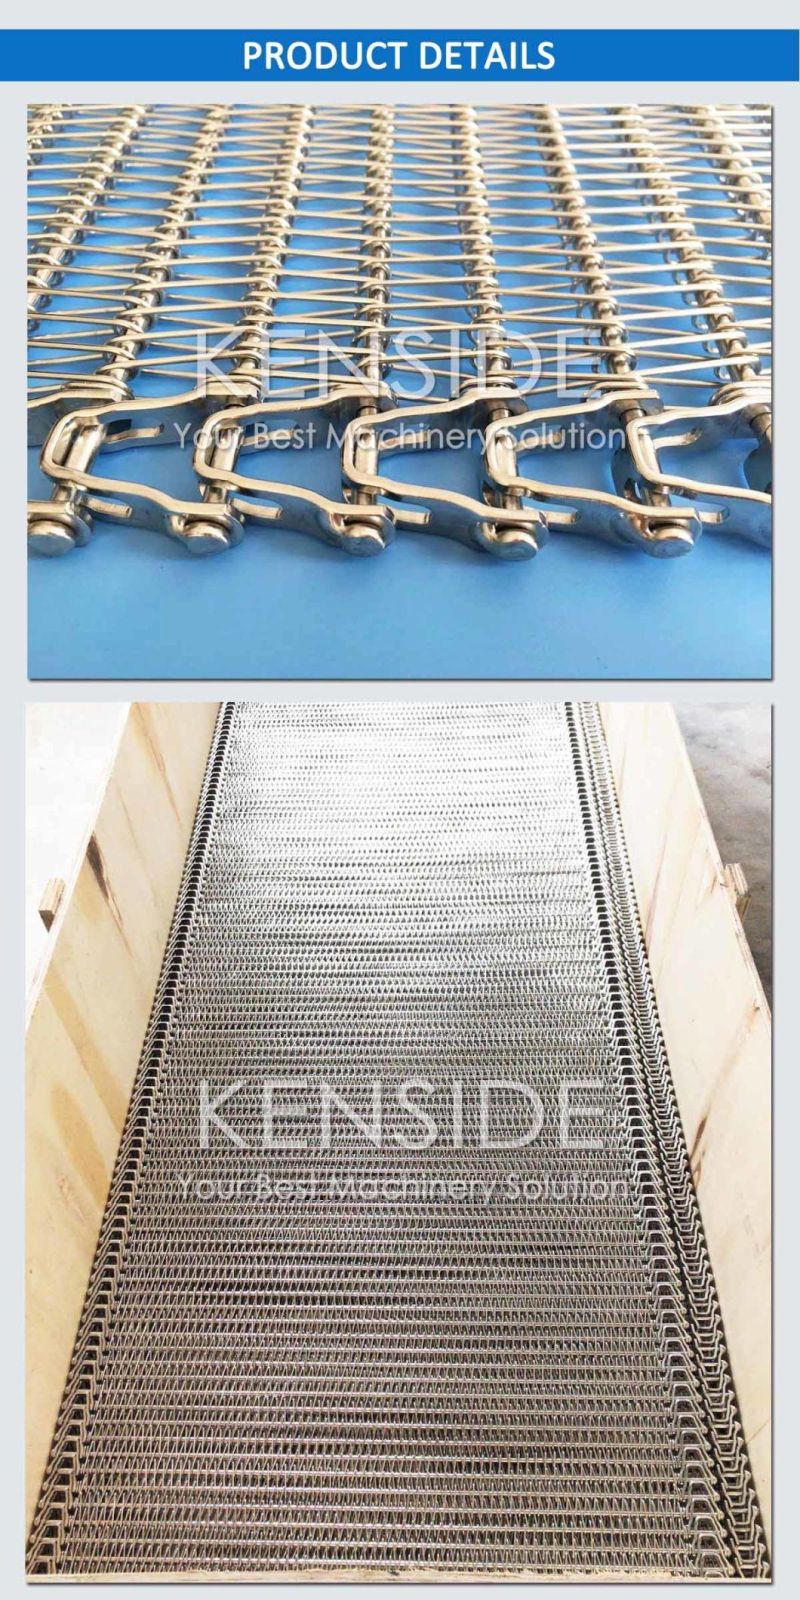 Space Saver Conveyor Belt Stainless Steel Belt for Cooling, Freezing, Proofing Spiral Applications